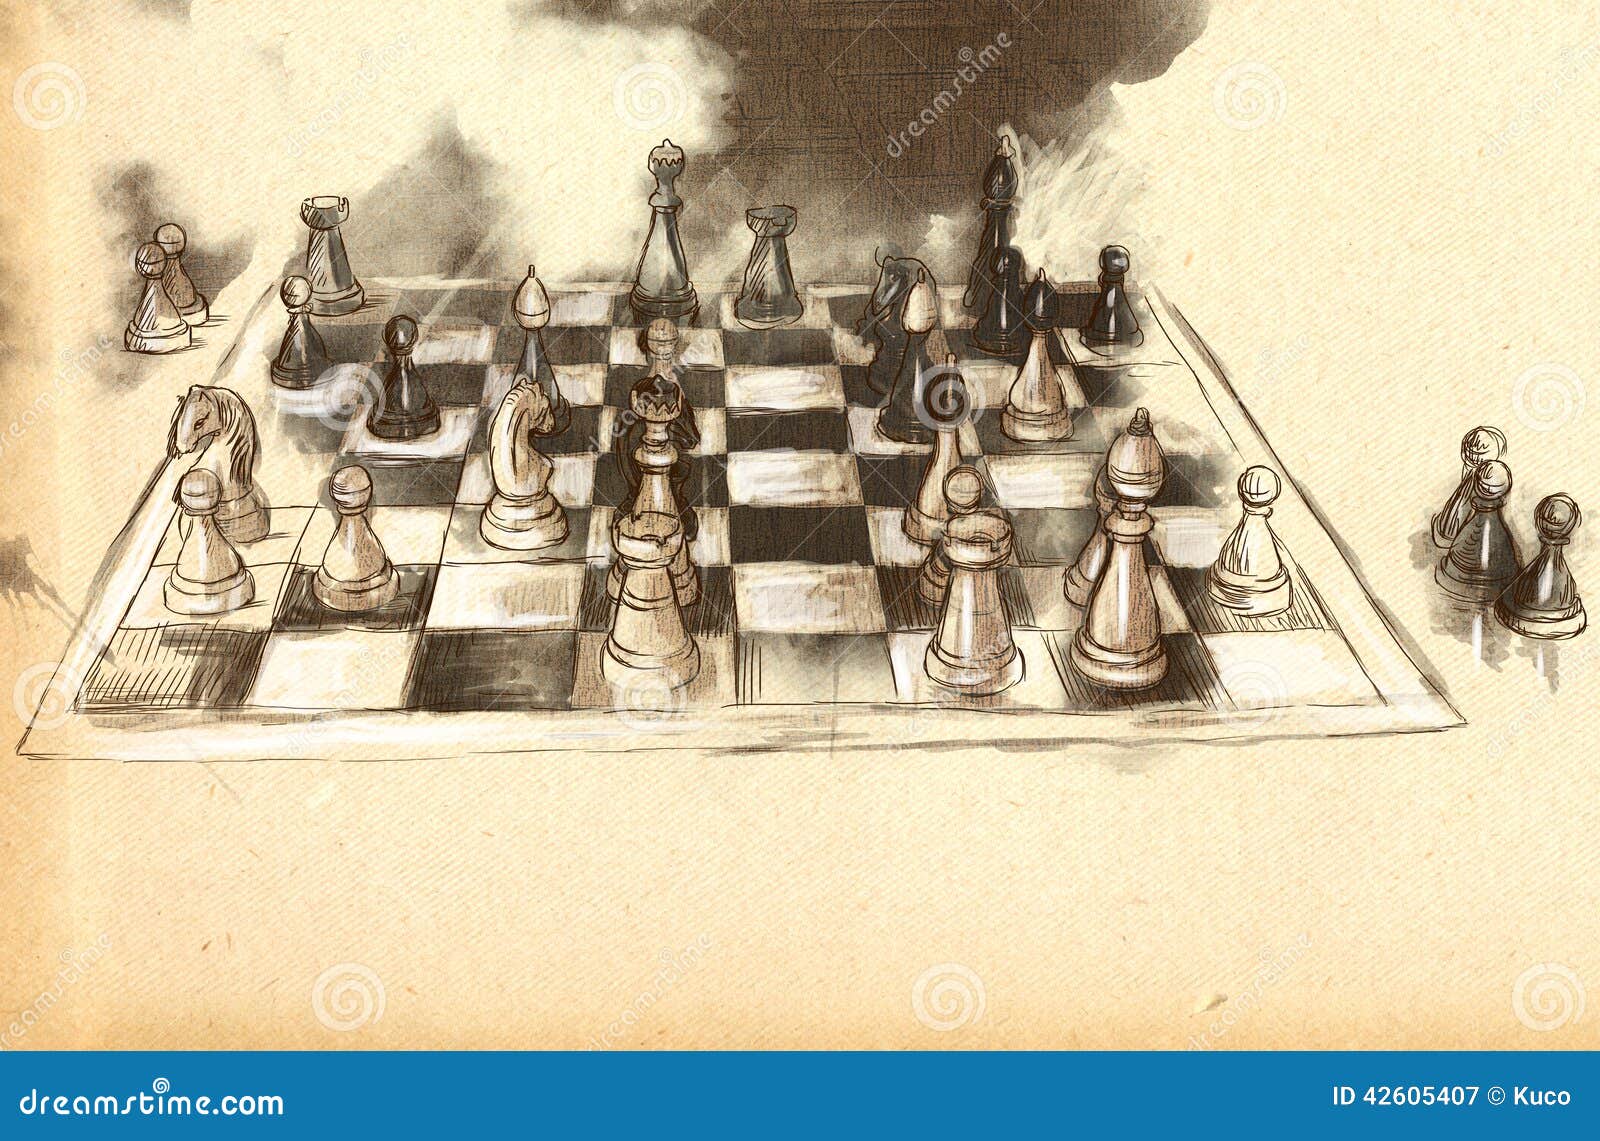 Worlds great chess games byrne - fischer Vector Image